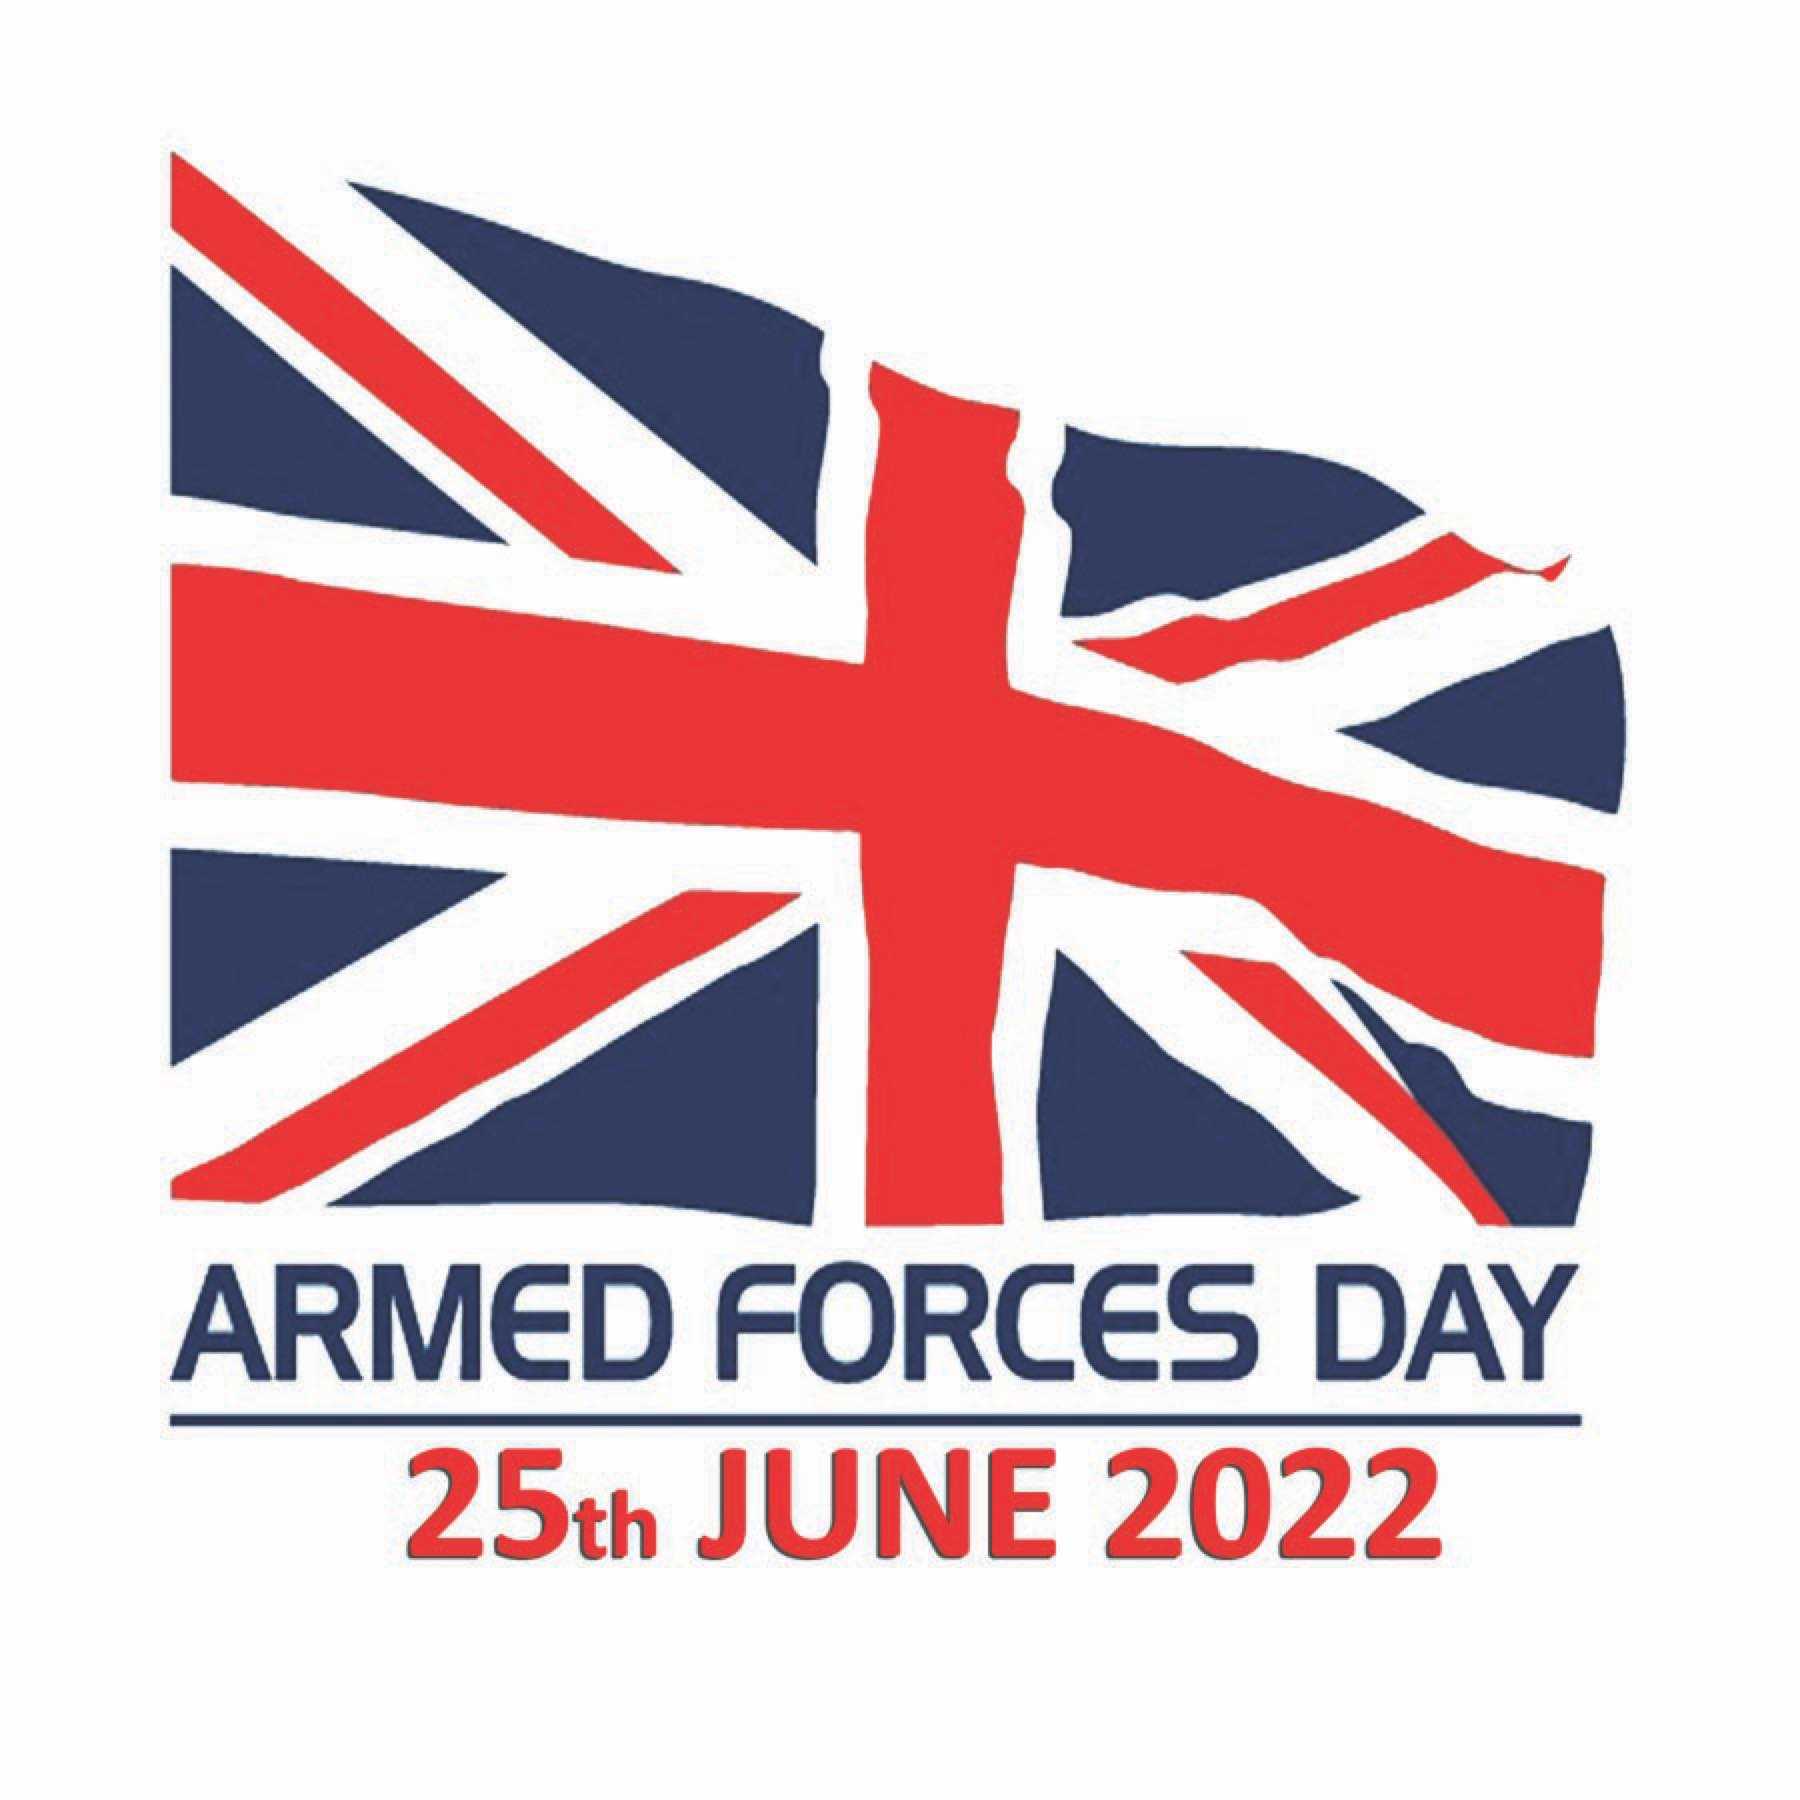 Armed Forces Day Image